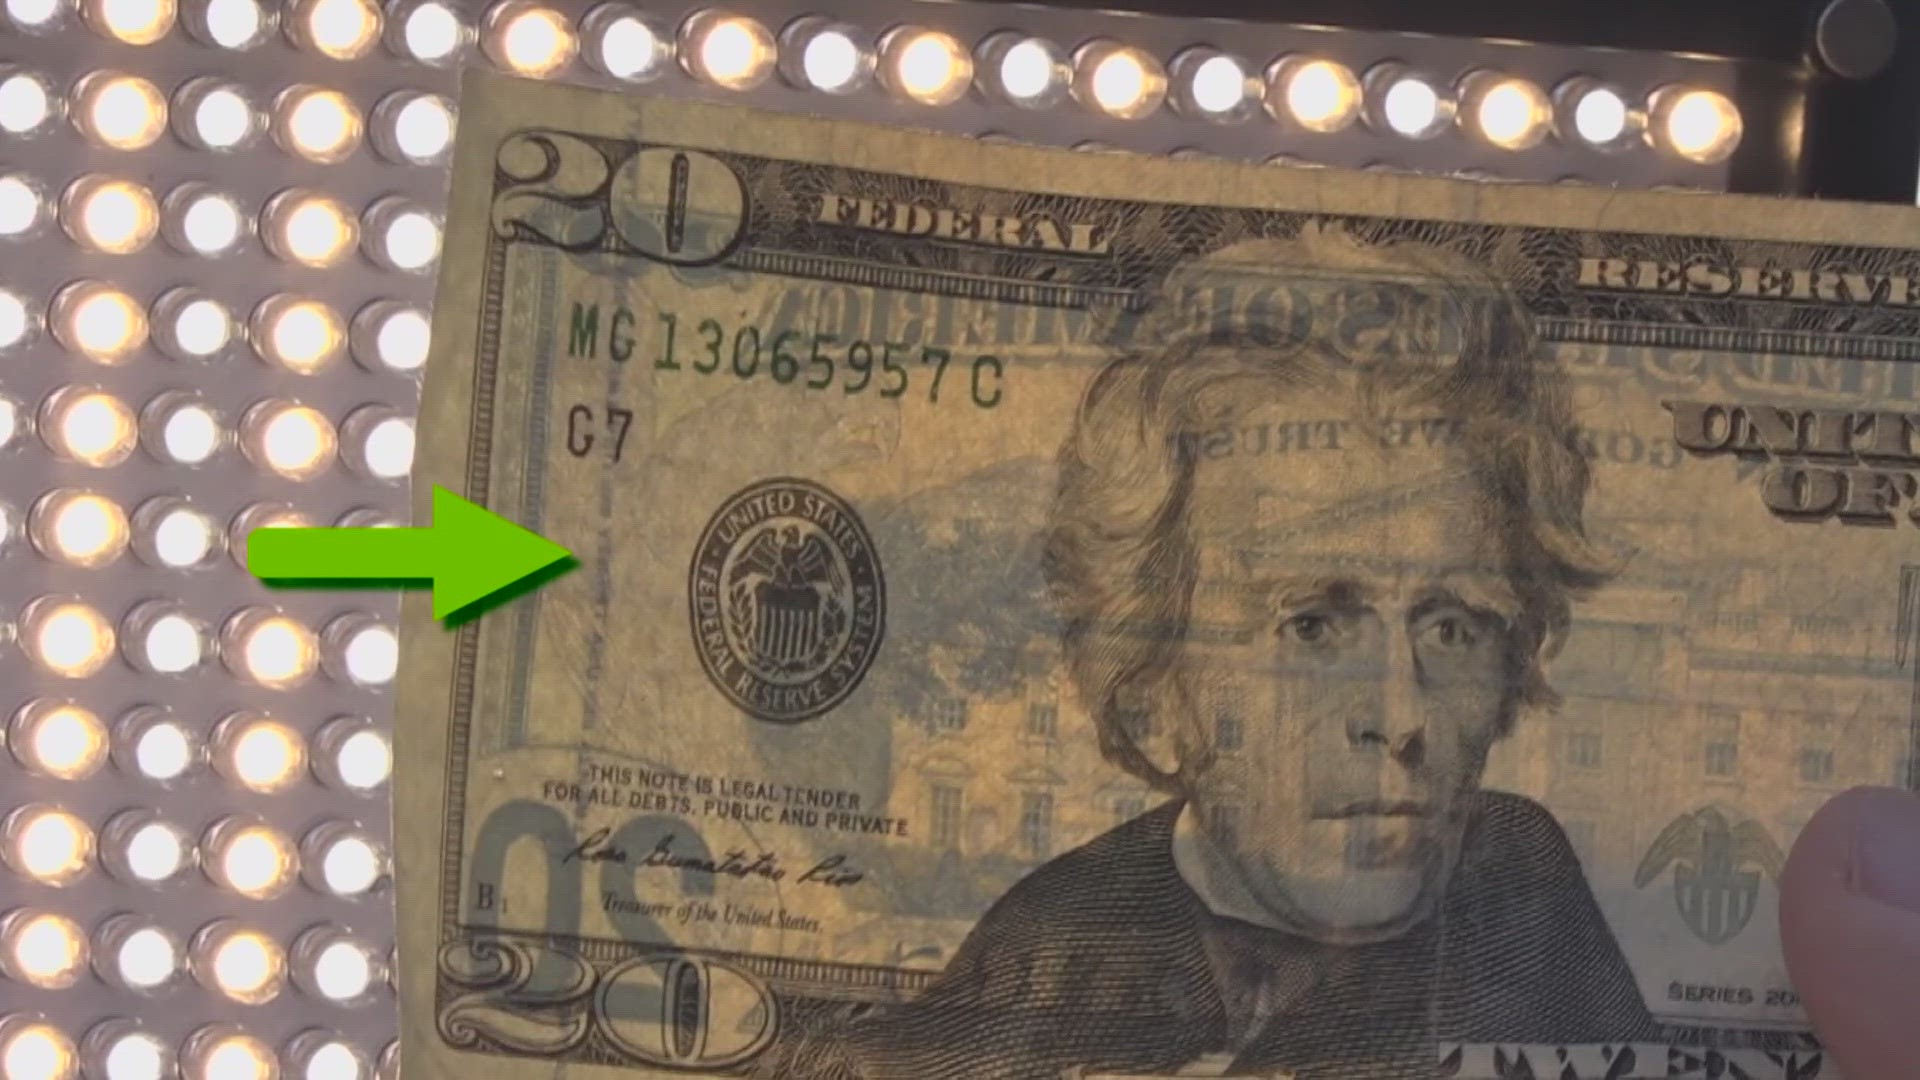 Counterfeit cash: How to know the cash in your hand is real